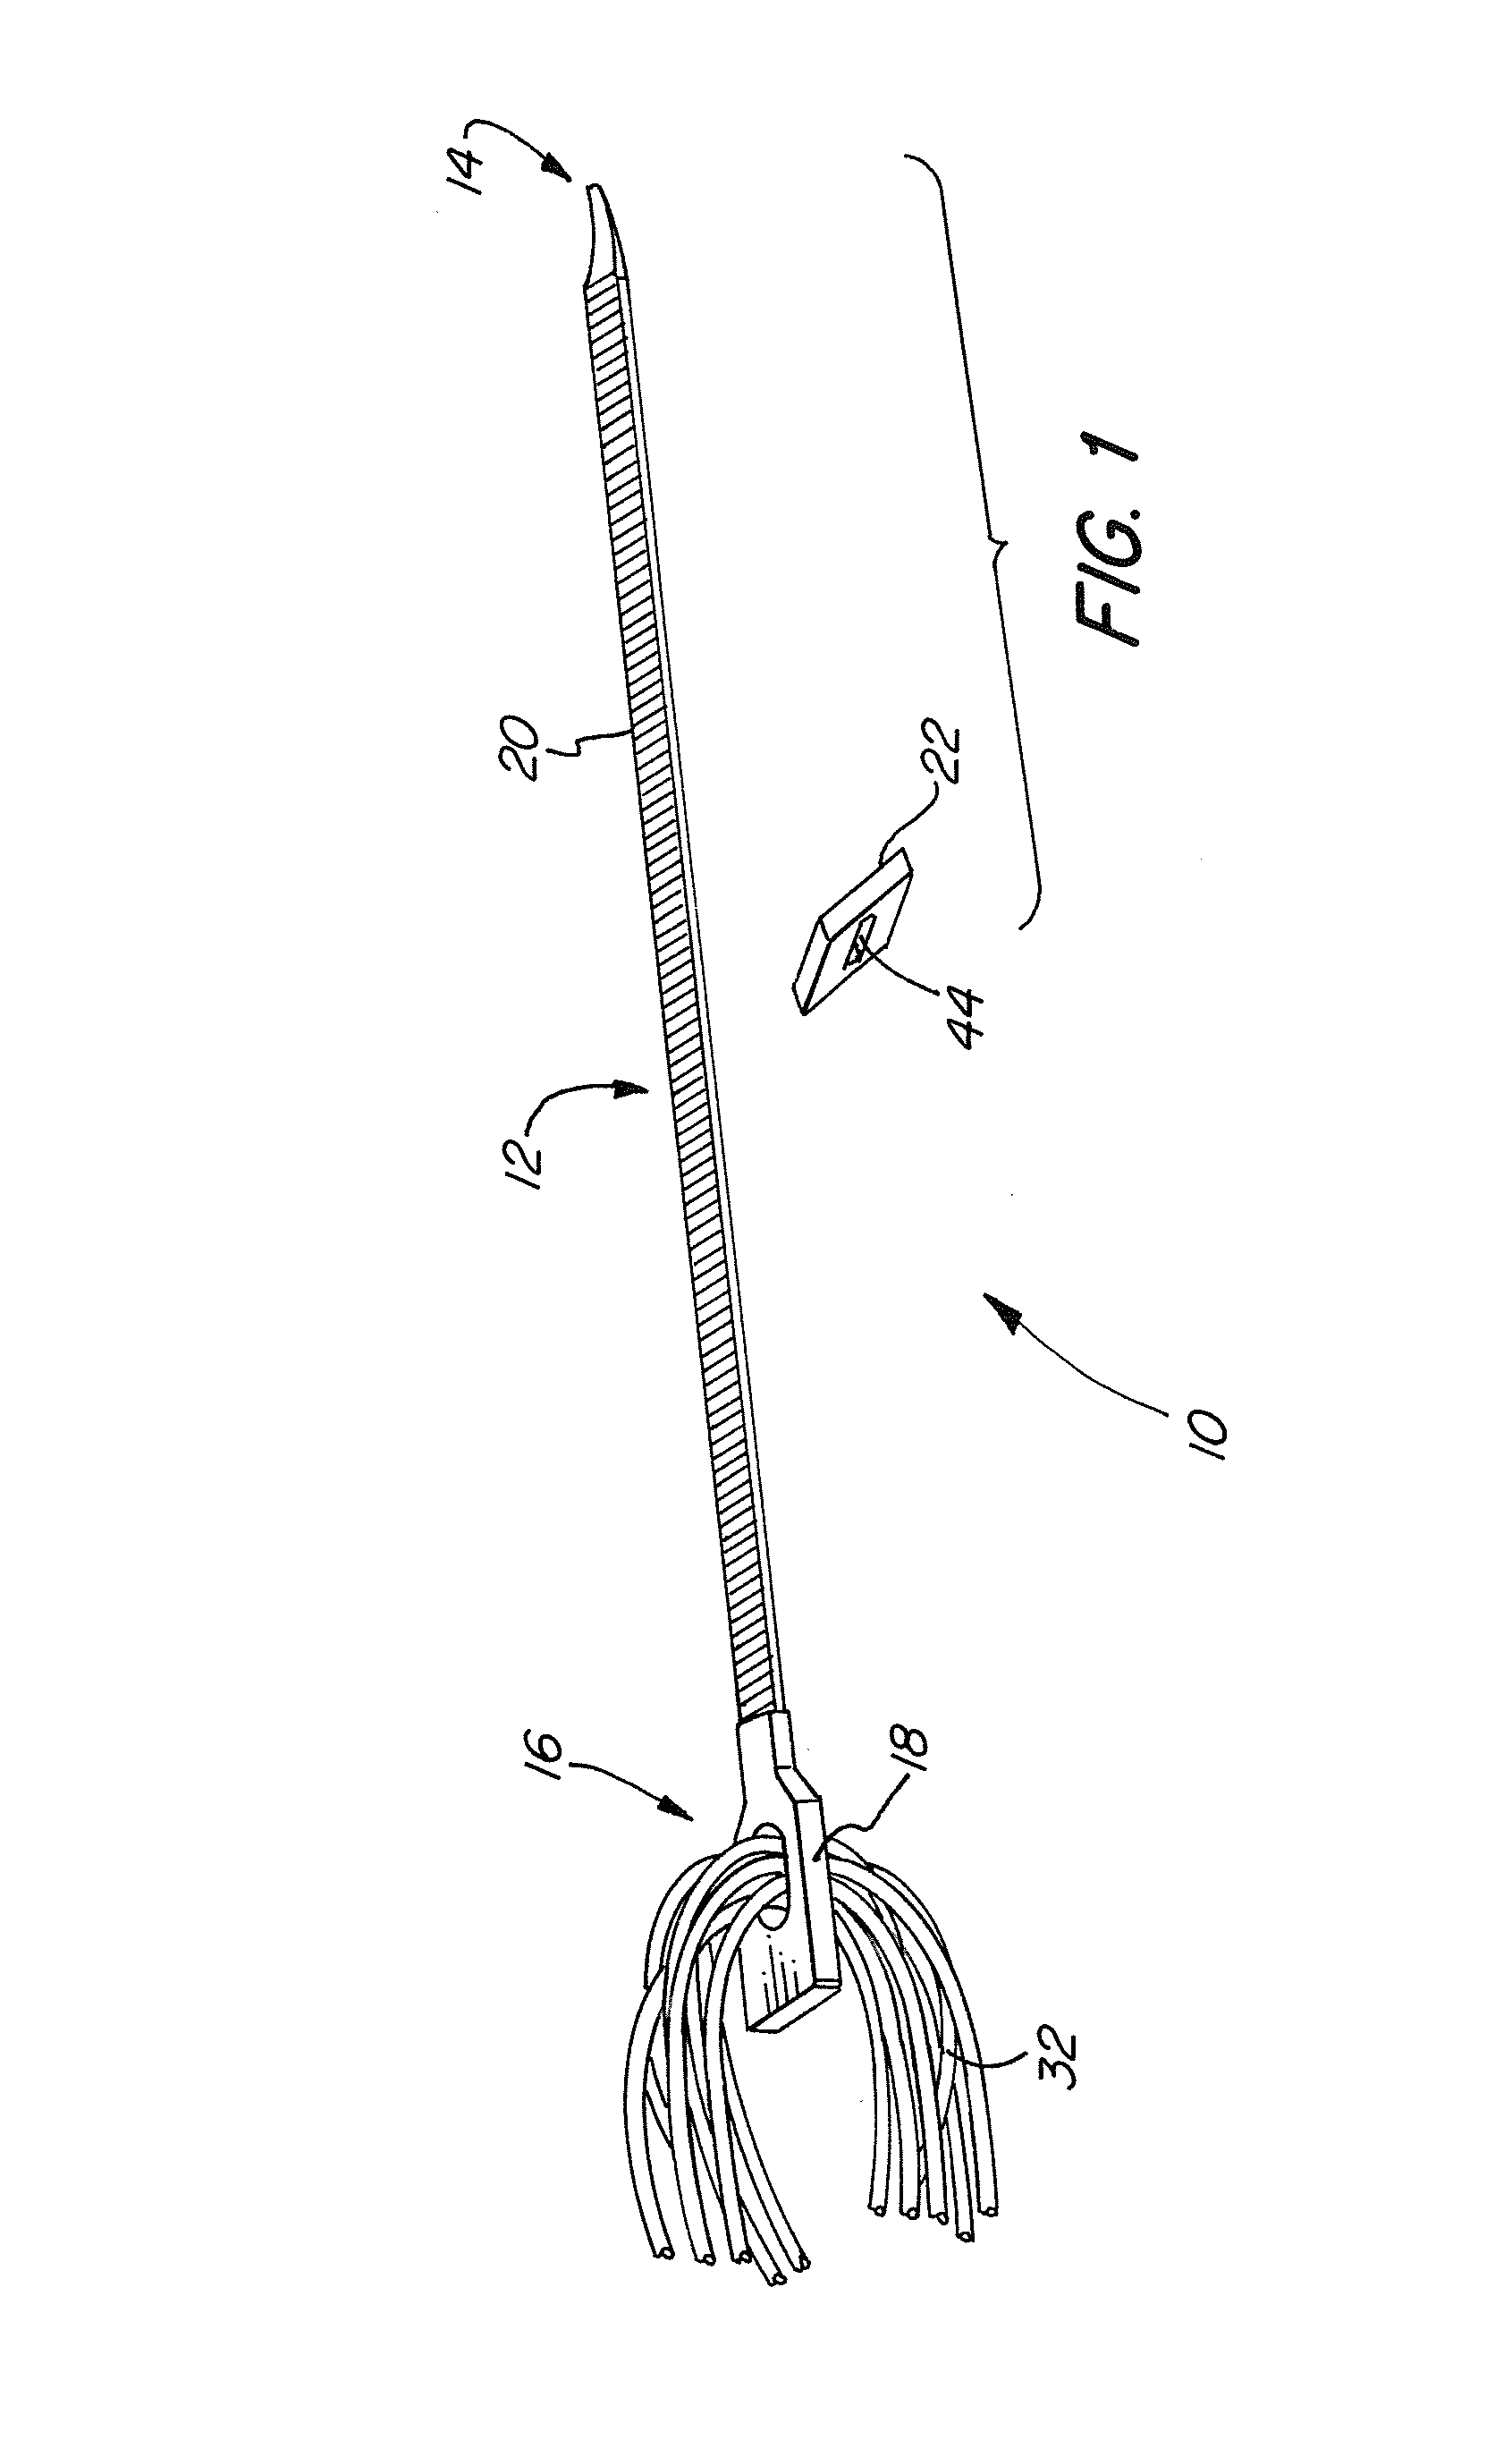 Method and device for the fixation of a tendon graft